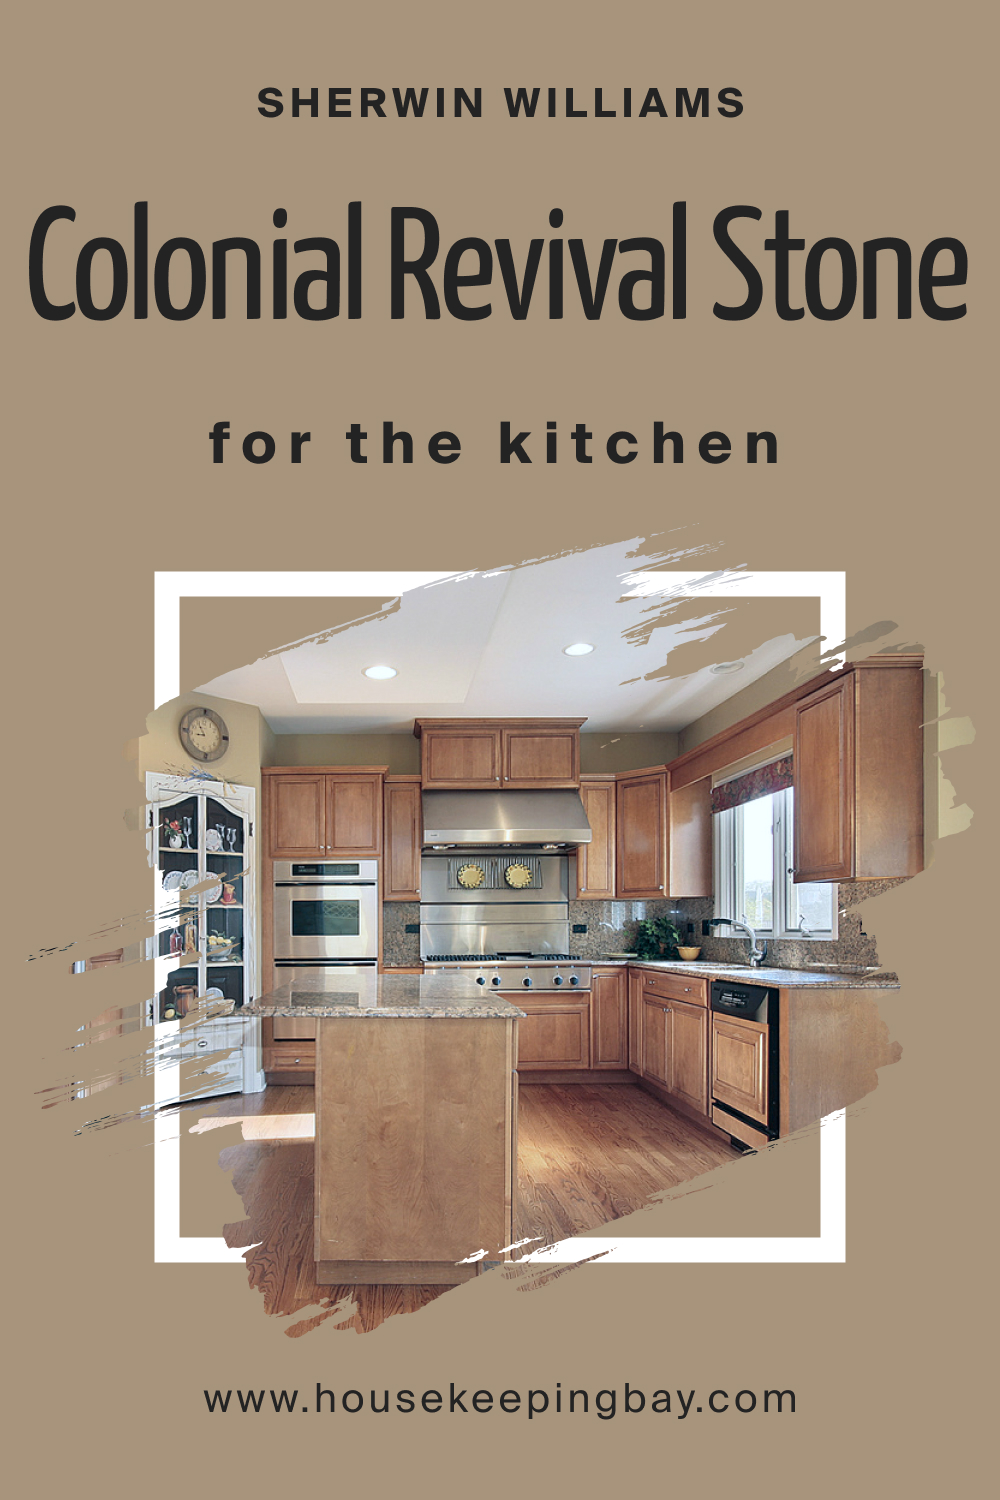 Sherwin Williams. SW 2827 Colonial Revival Stone For the Kitchens